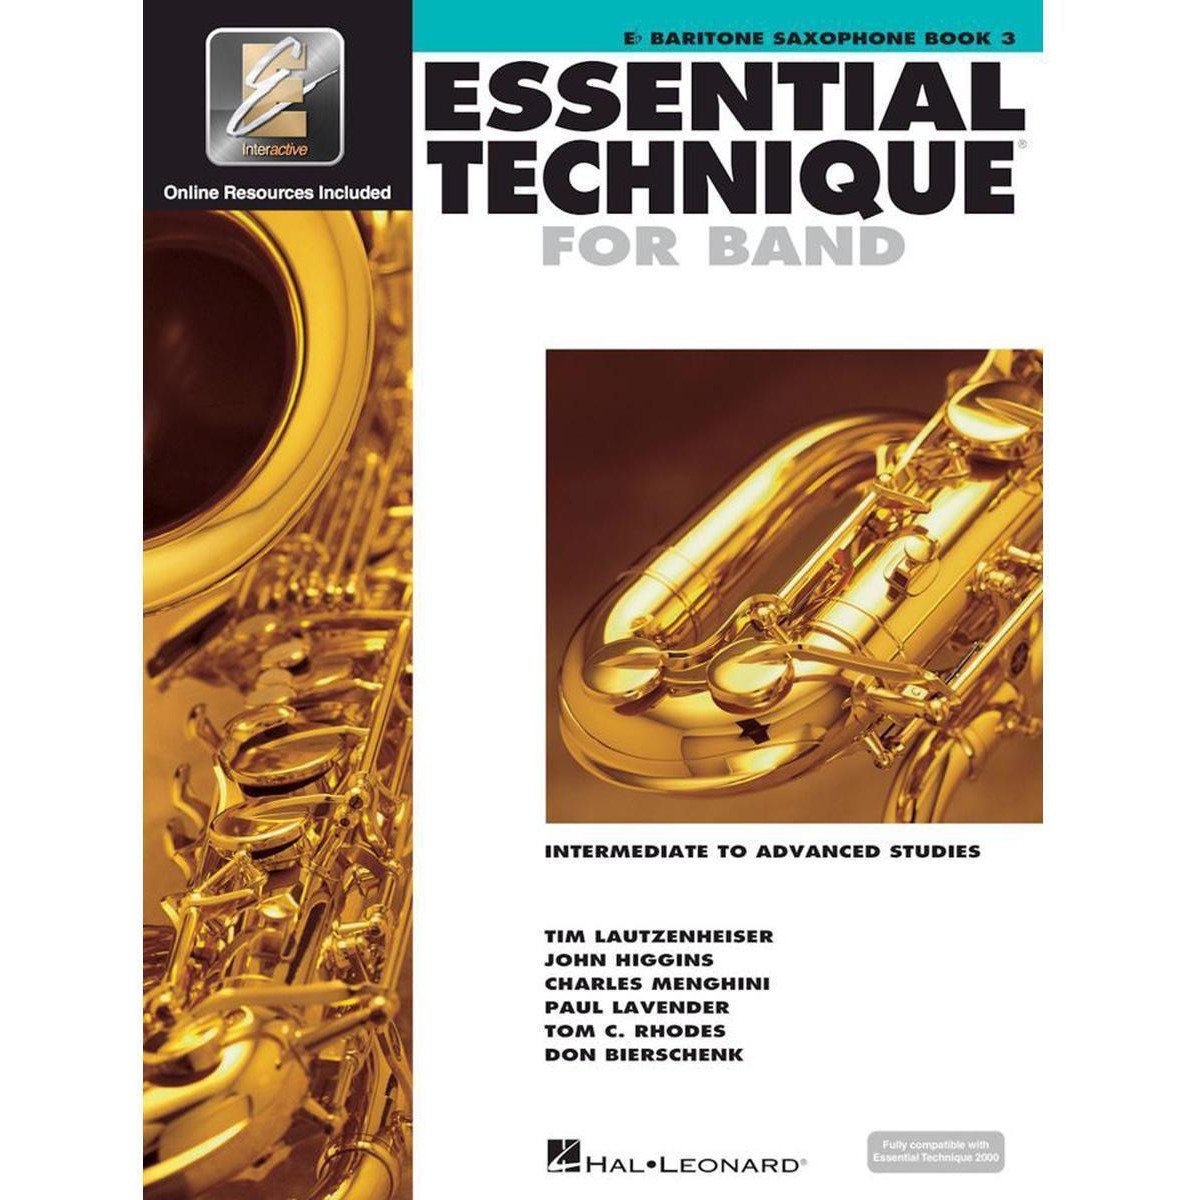 Essential Technique for Band Book 3-Eb Baritone Saxophone-Andy's Music